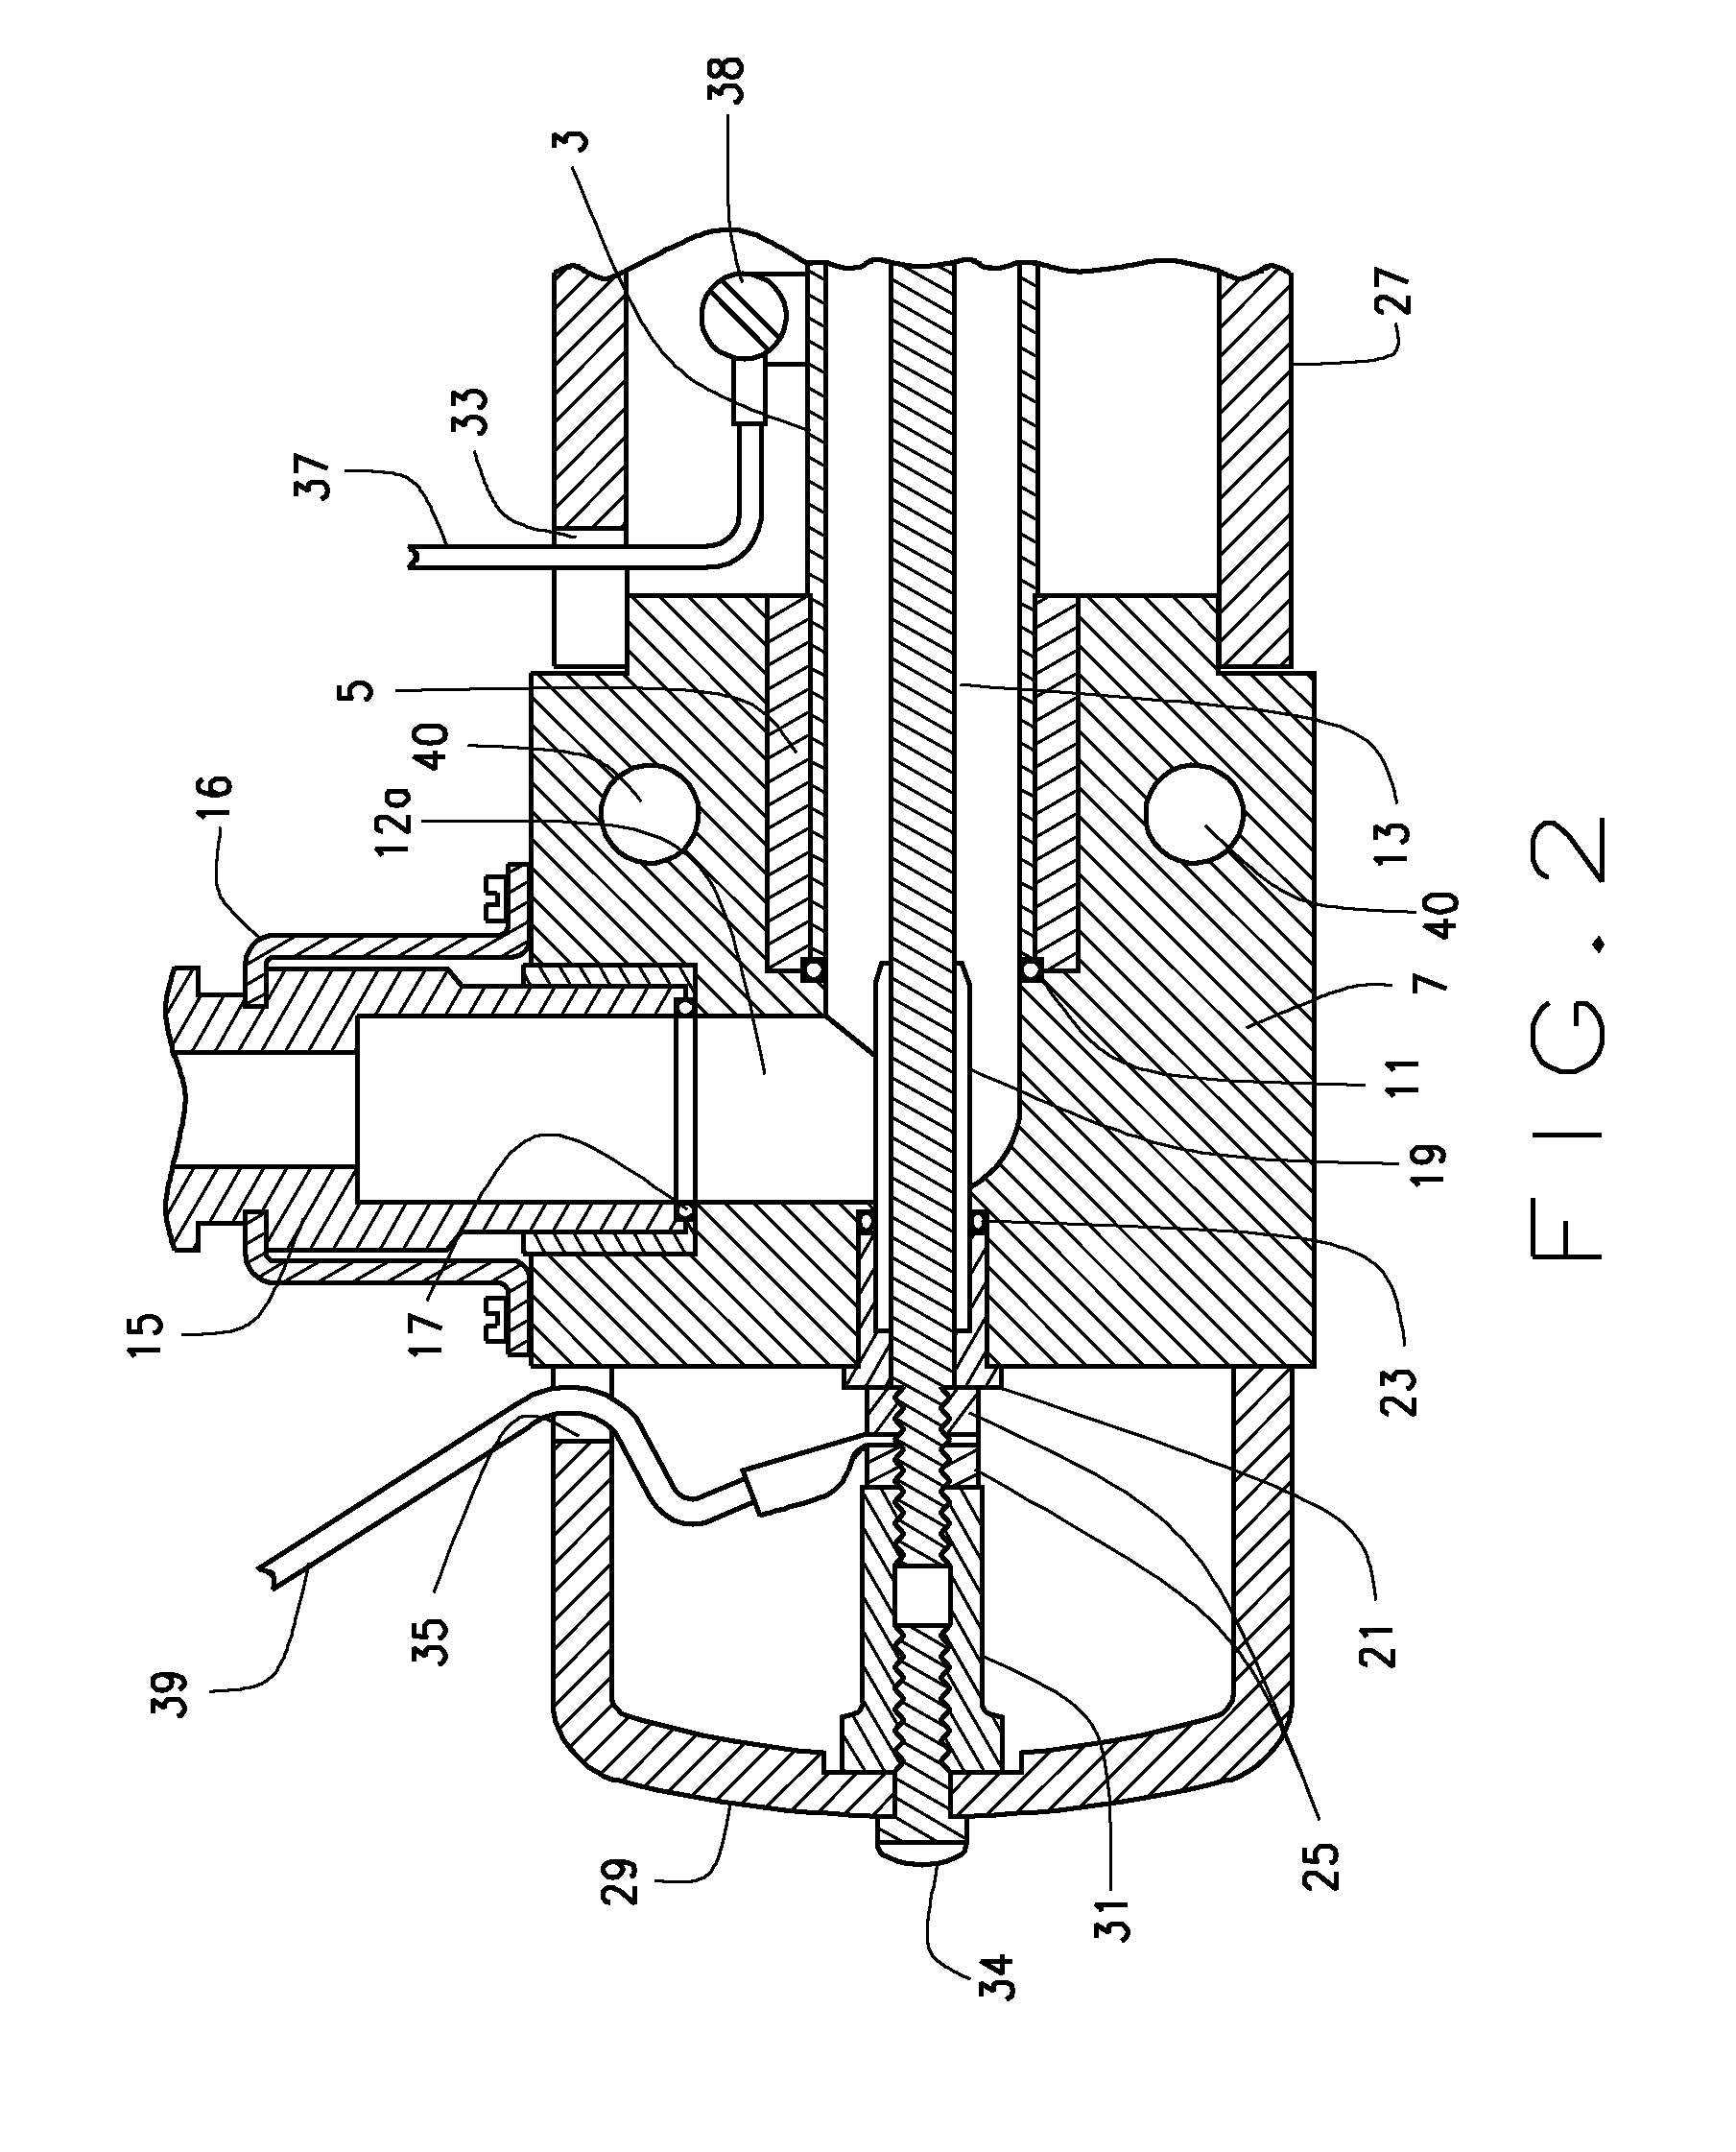 Method and Apparatus for the Purification and Analytical Evaluation of Highly Purified Liquids